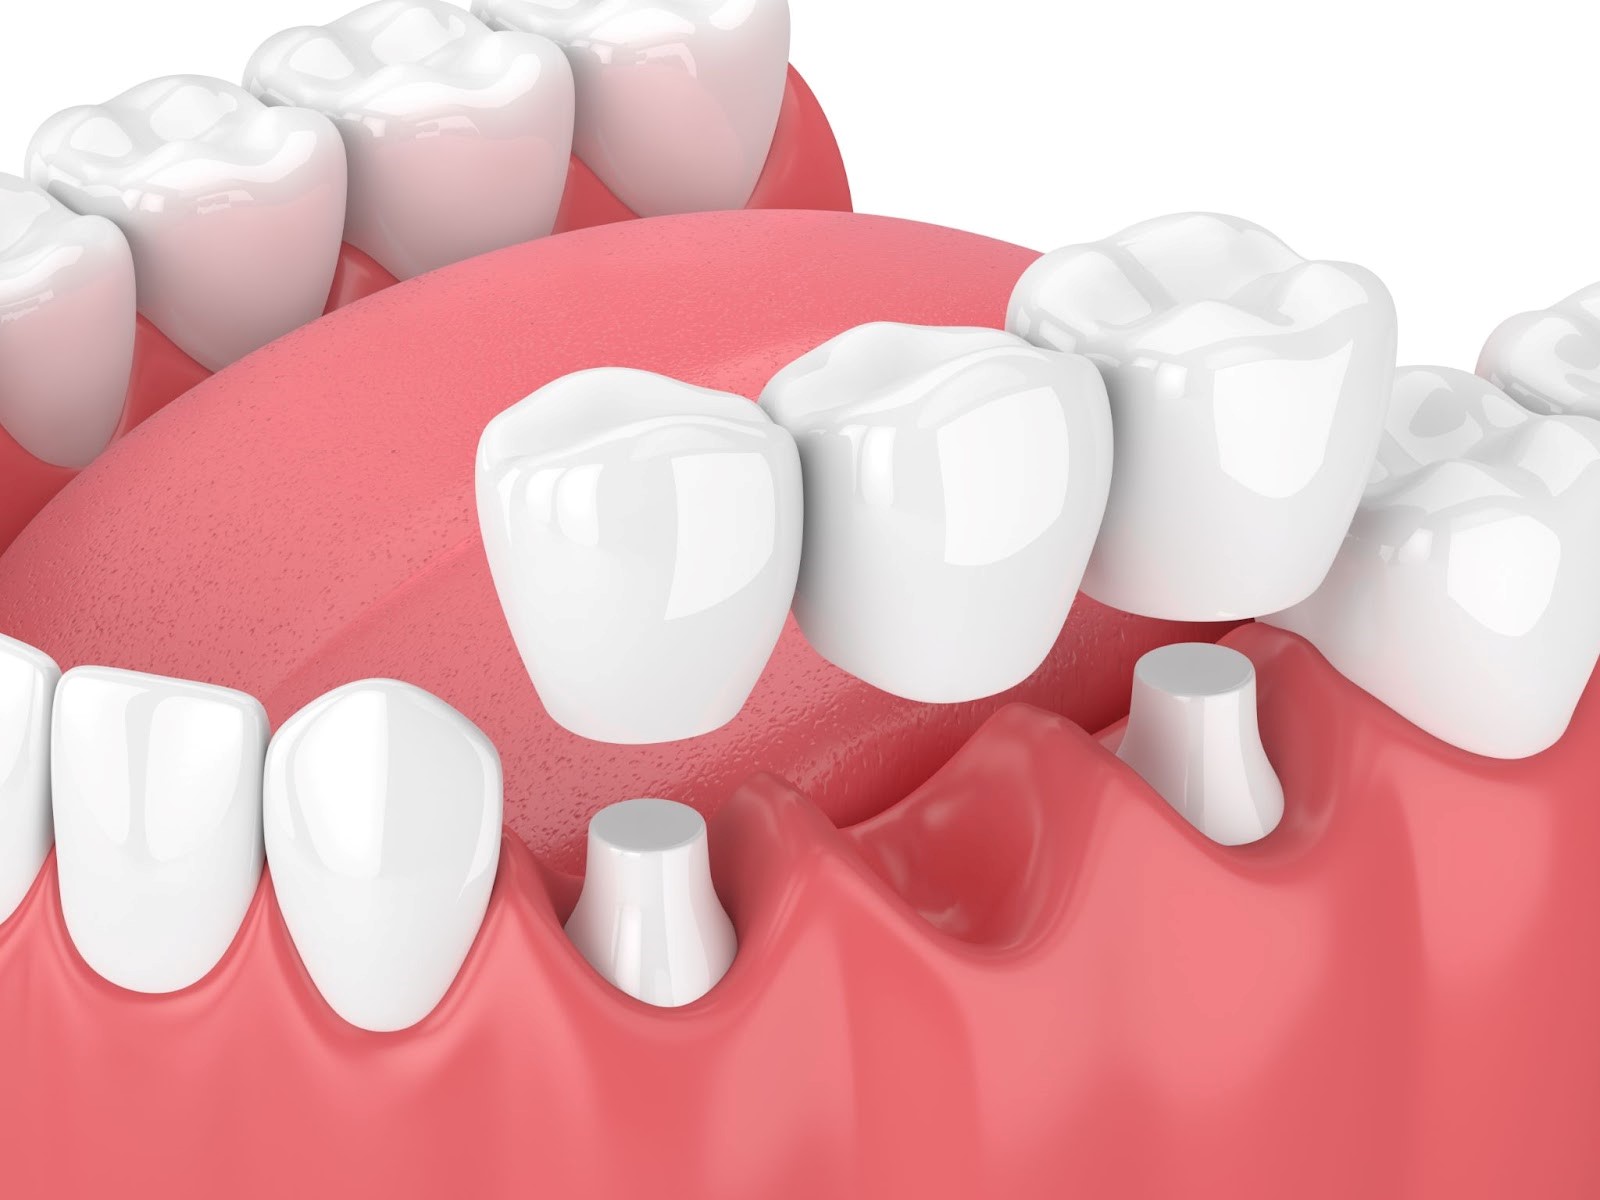 What Is a Dental Bridge? Know Your Options for Missing Teeth